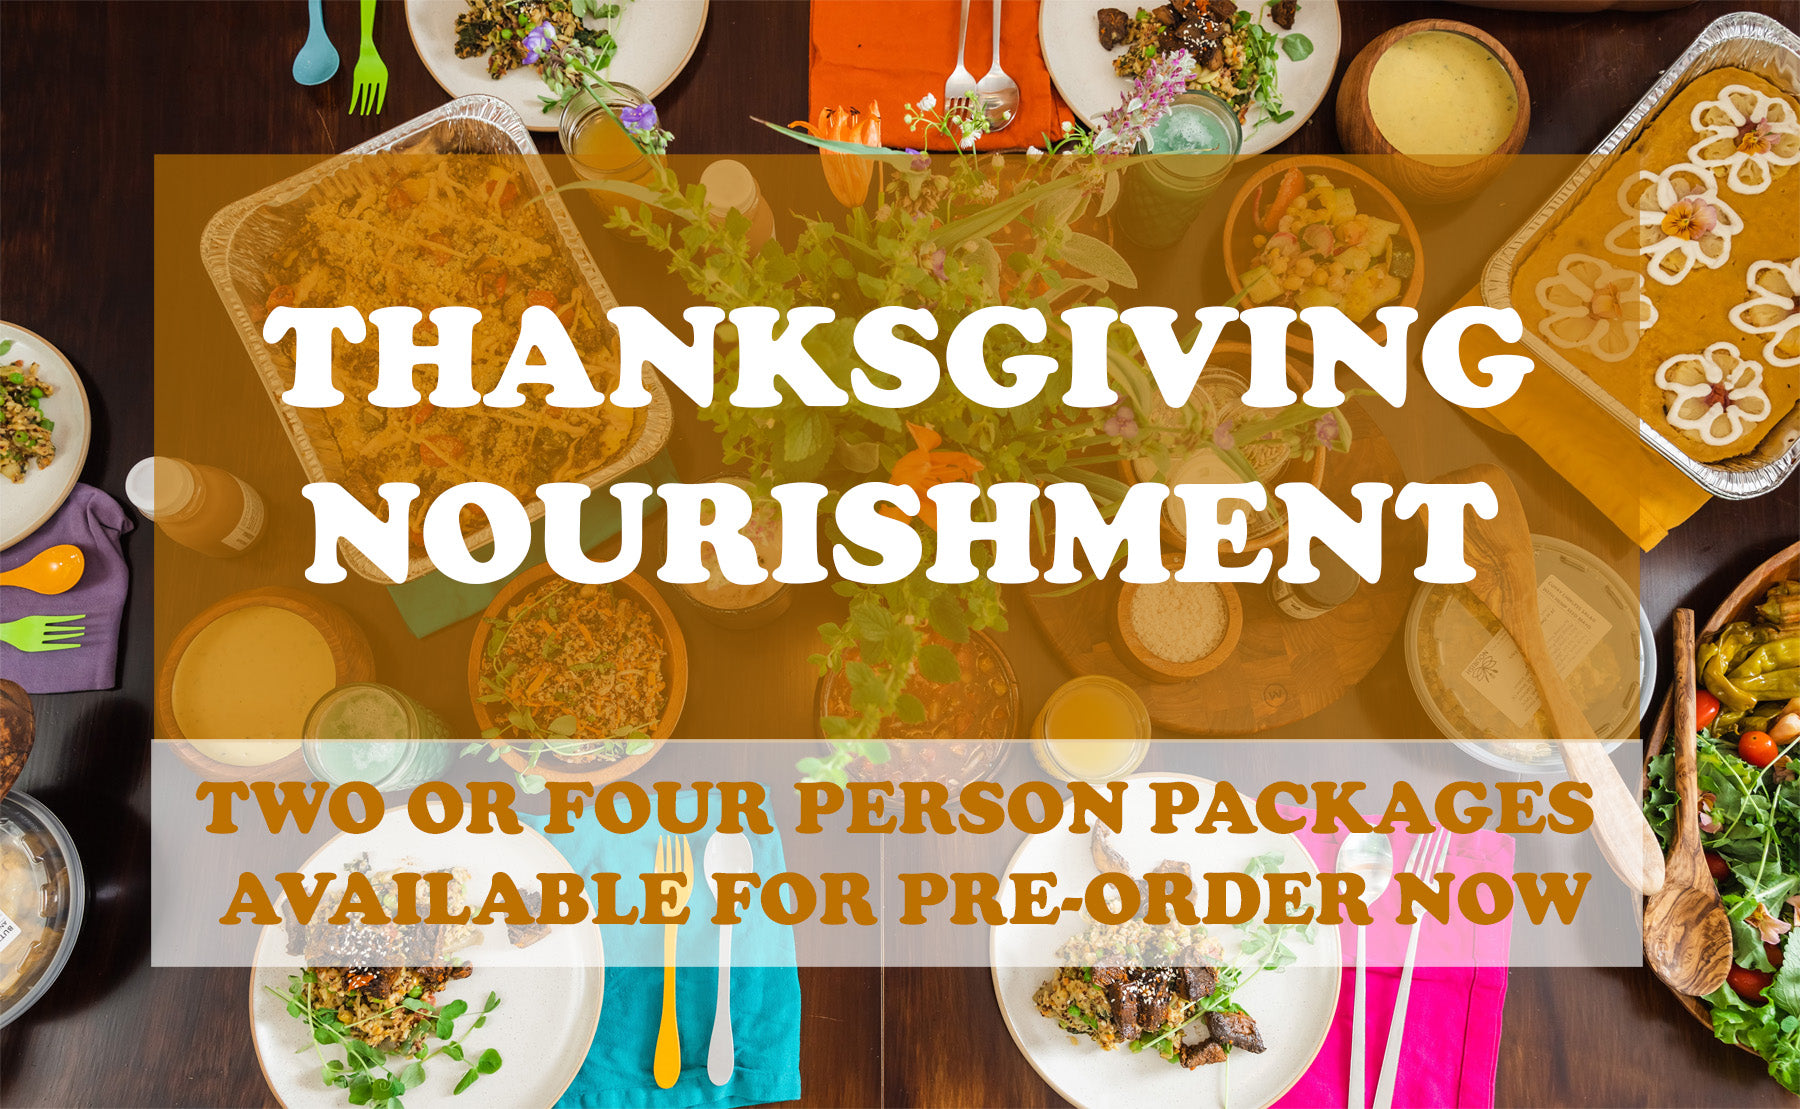 Thanksgiving Nourishment for you? Pre-order our gorgeous Thanksgiving packages for delivery to your doorstep 11/21 or 11/22!